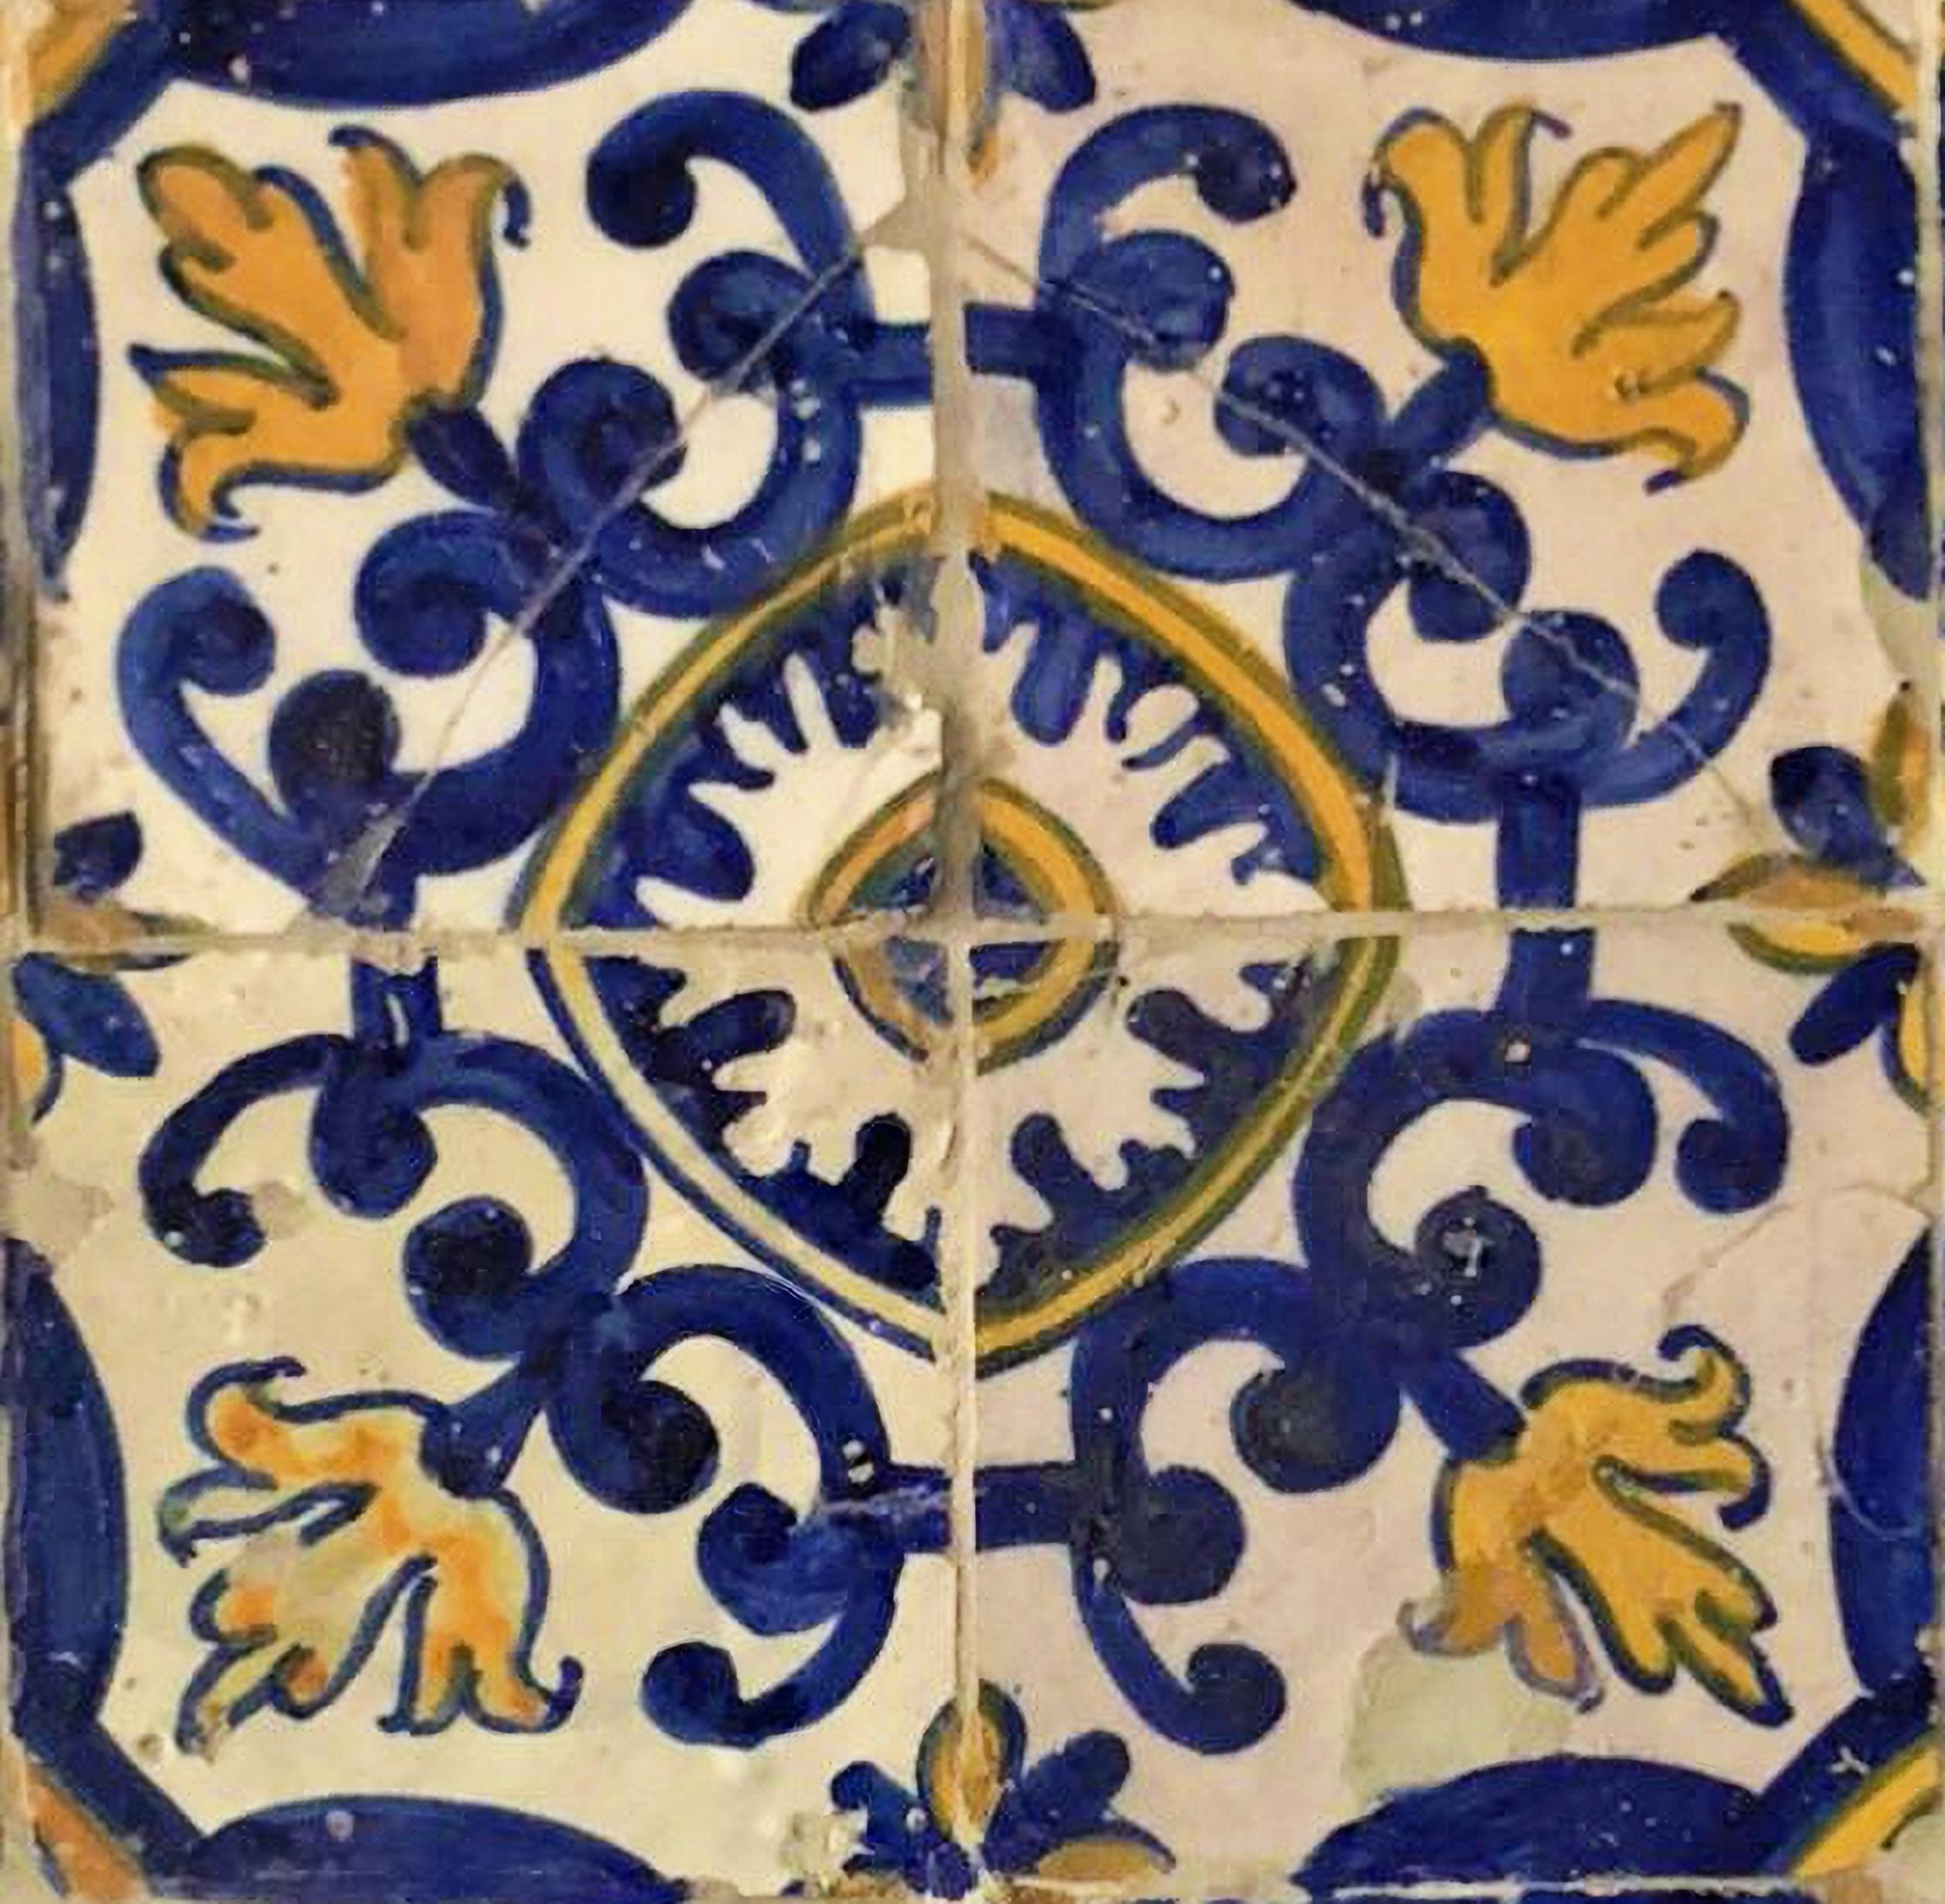 17th century Portuguese Tile Panel
restored
56cm x 56cm
14cm x 14cm tiles

With certificate of authenticity and export issued by the Directorate General of Portuguese Cultural Heritage, the only official department for issuing certificates for works